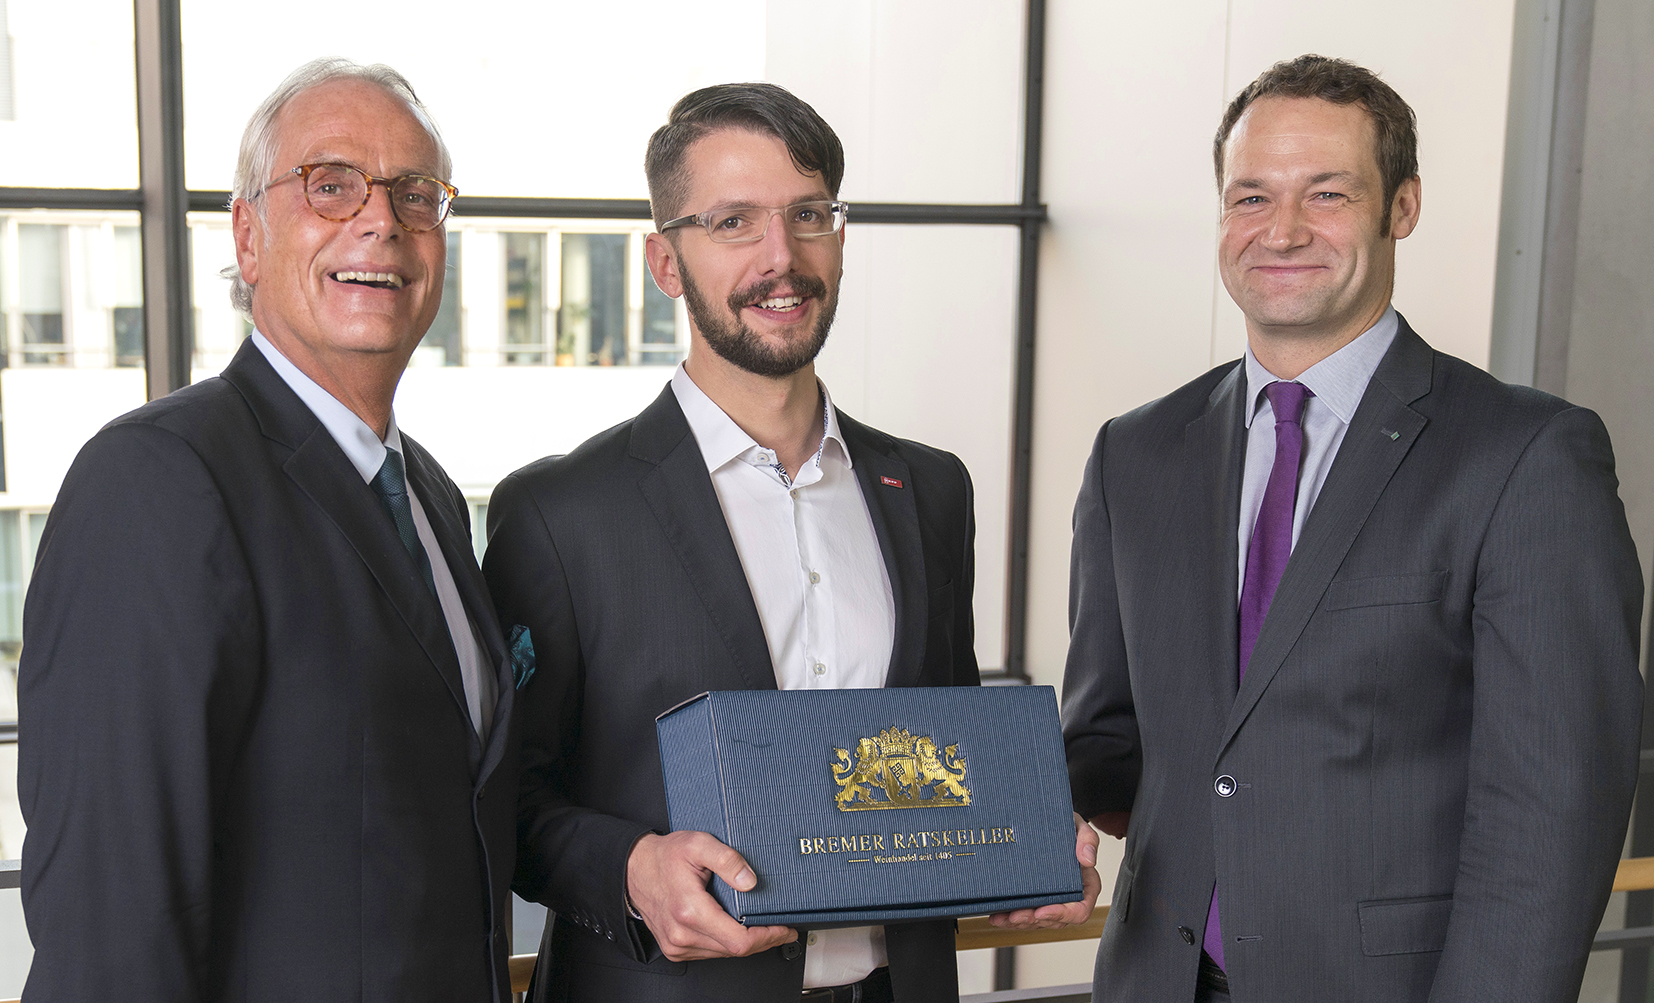 Prof. Dr. Andreas Groß (left) and Dr. Erik Meiß (right) honor Marco Molisse during the 17th Bremen Bonding Days as the ten thousandth course participant of the Training Center for Adhesive Bonding Technology.